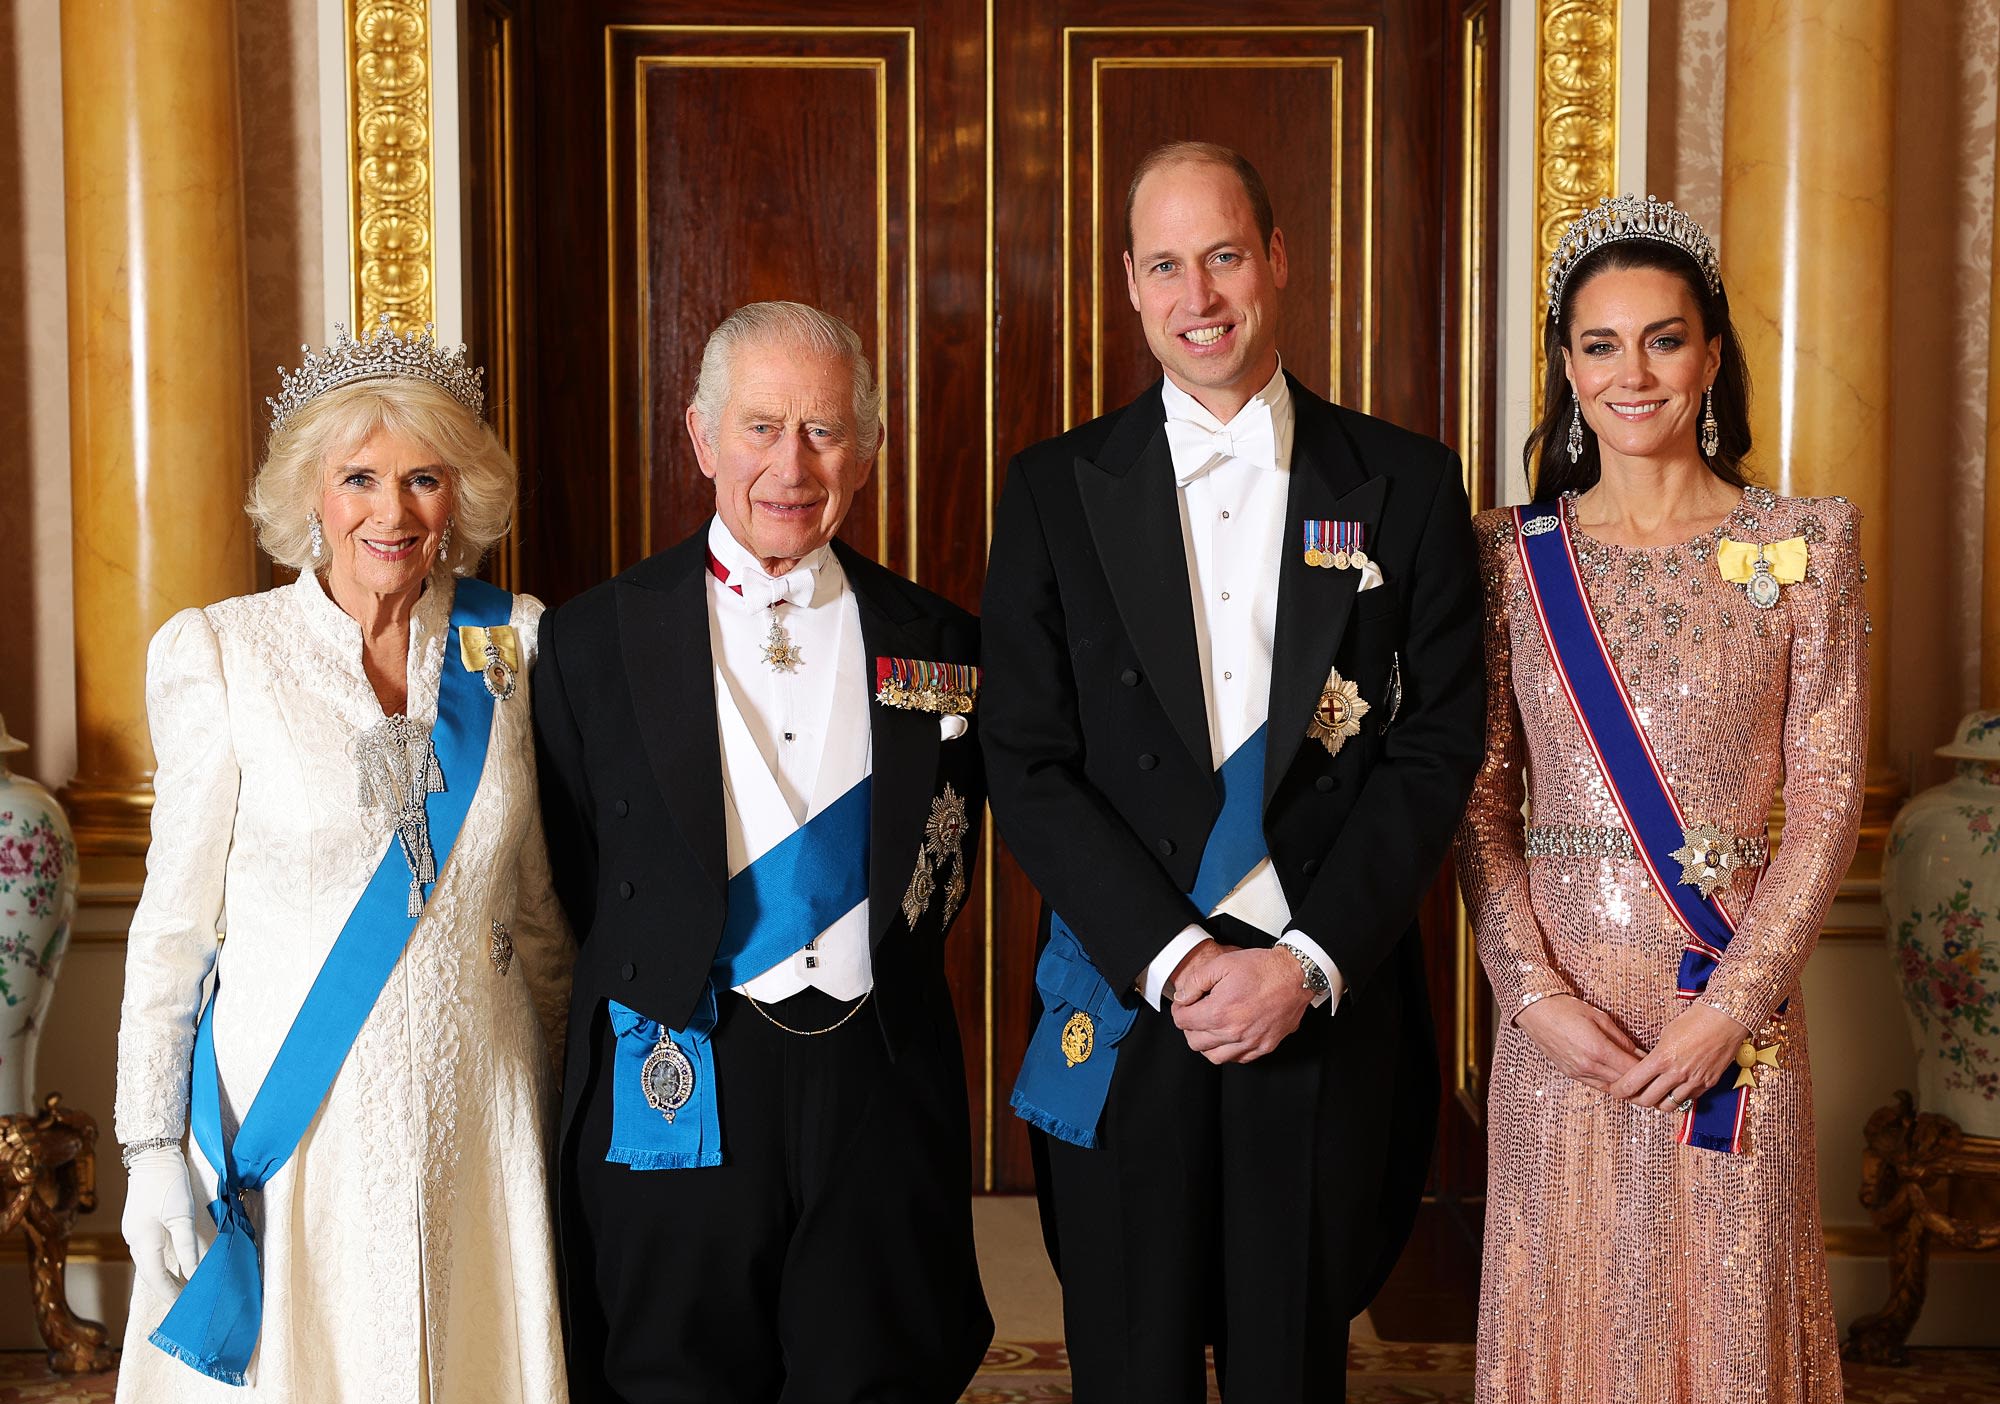 Looking Back at the Royals' Biggest Moments Since King Charles' Coronation